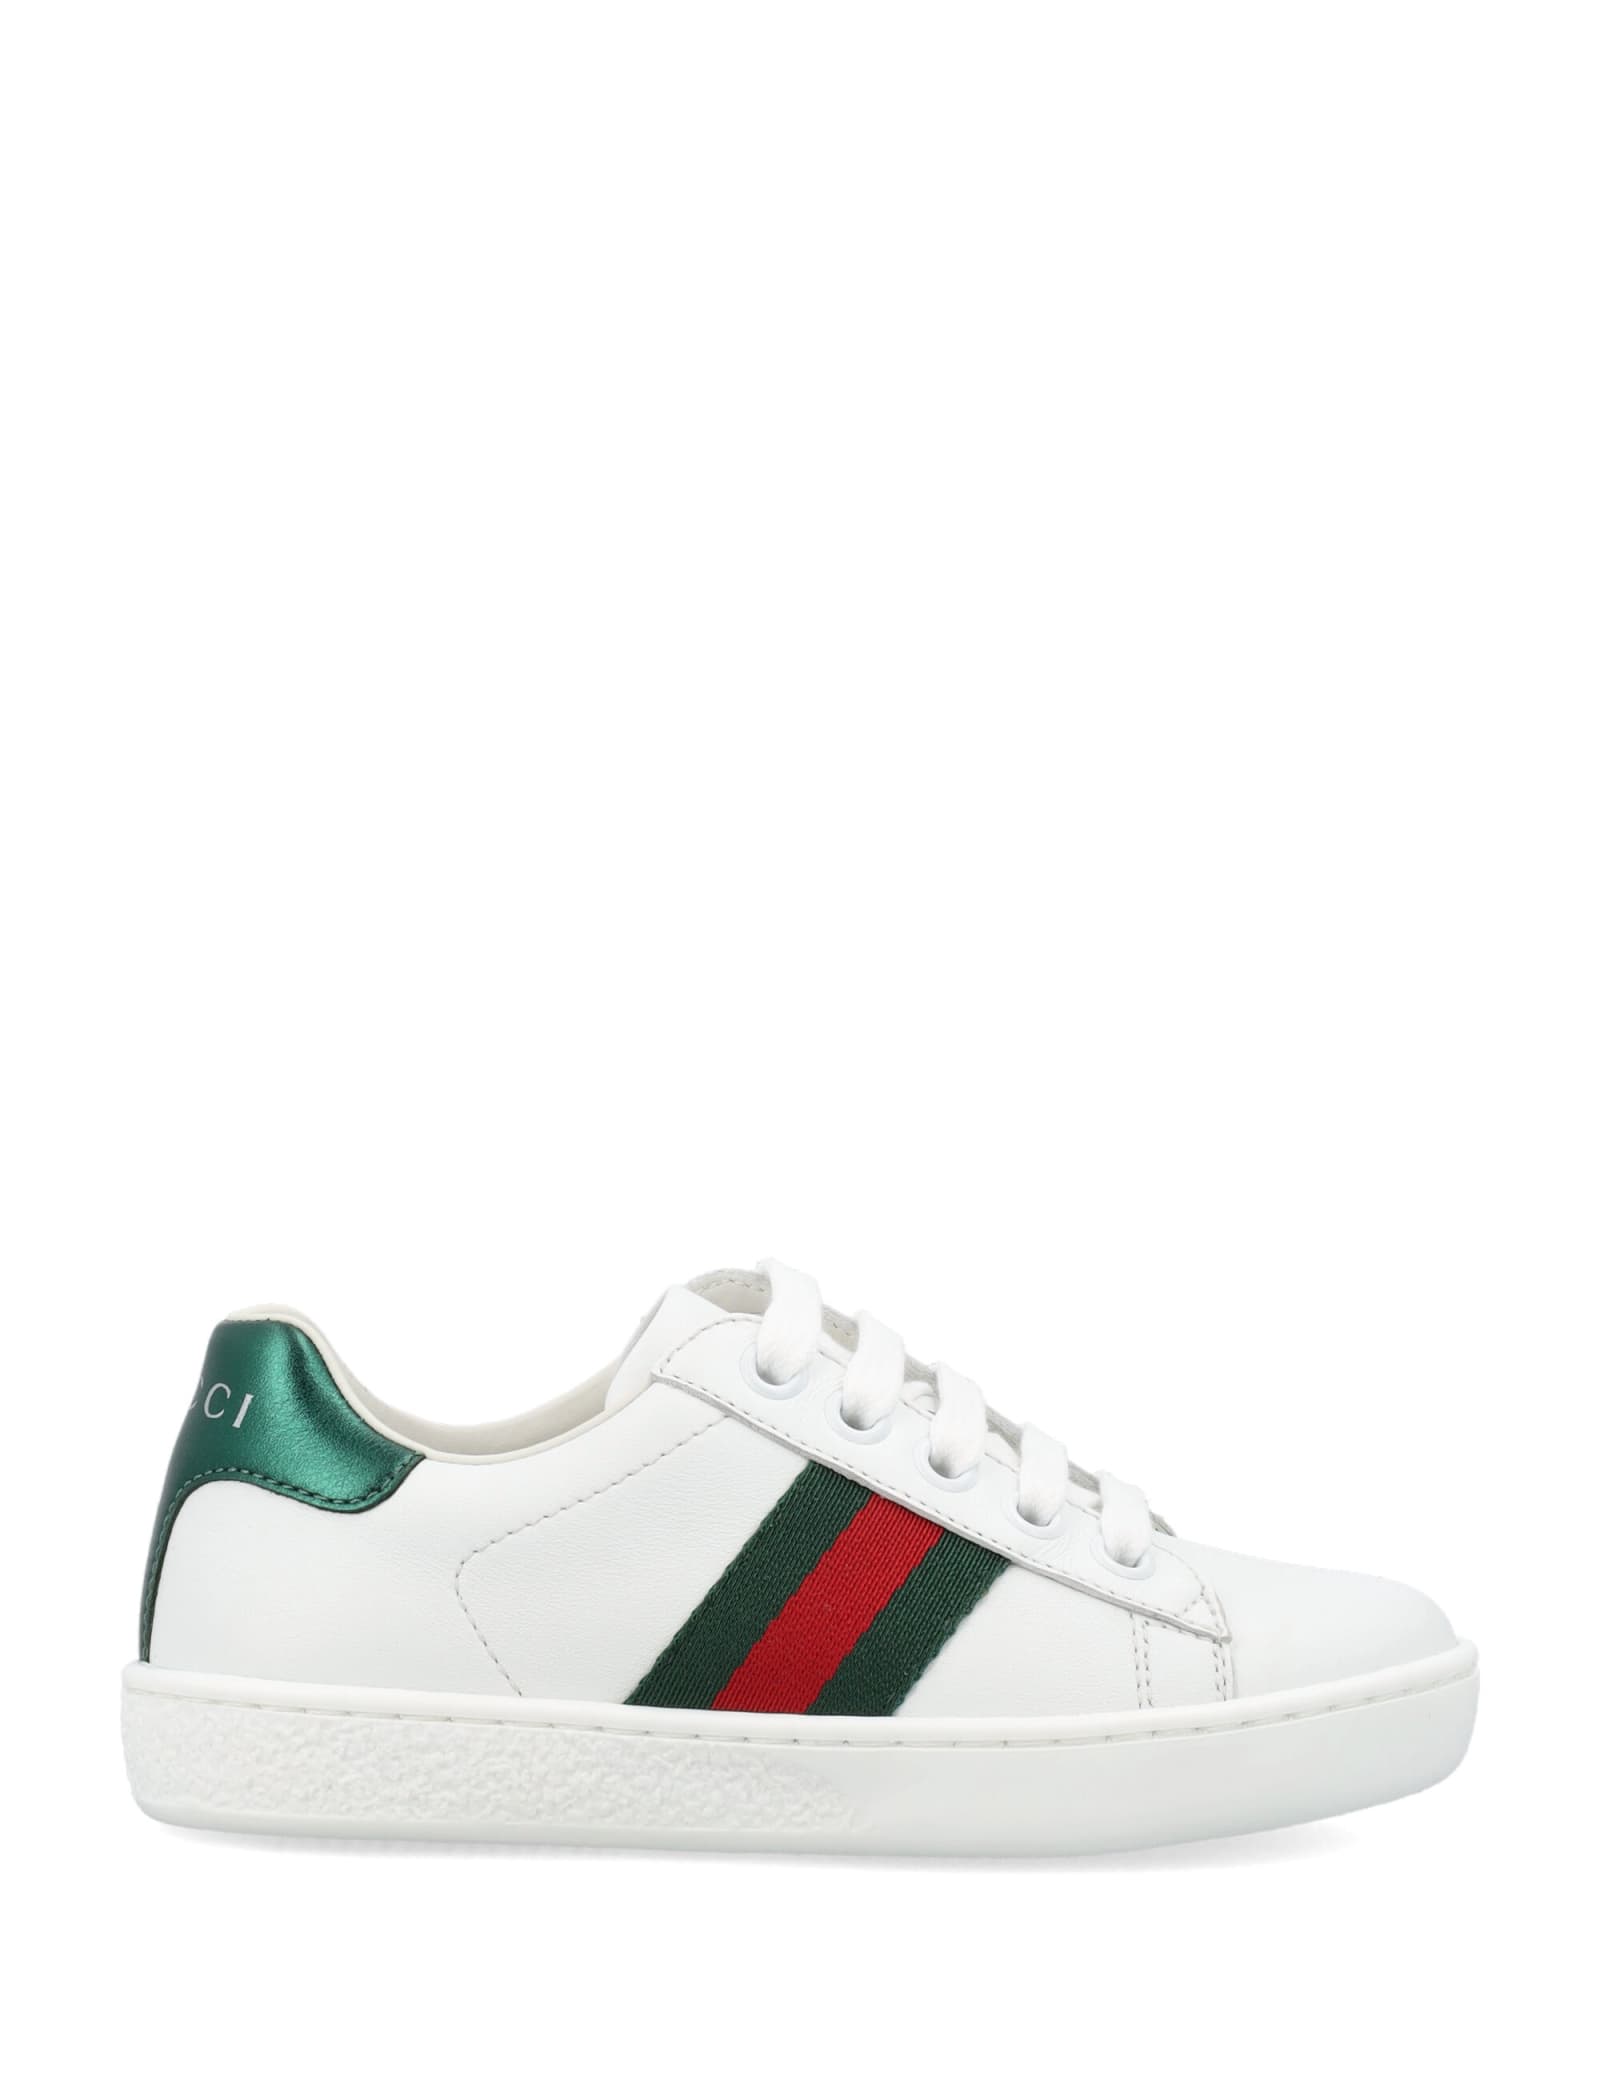 Gucci Ace Lace-up Leather Sneaker